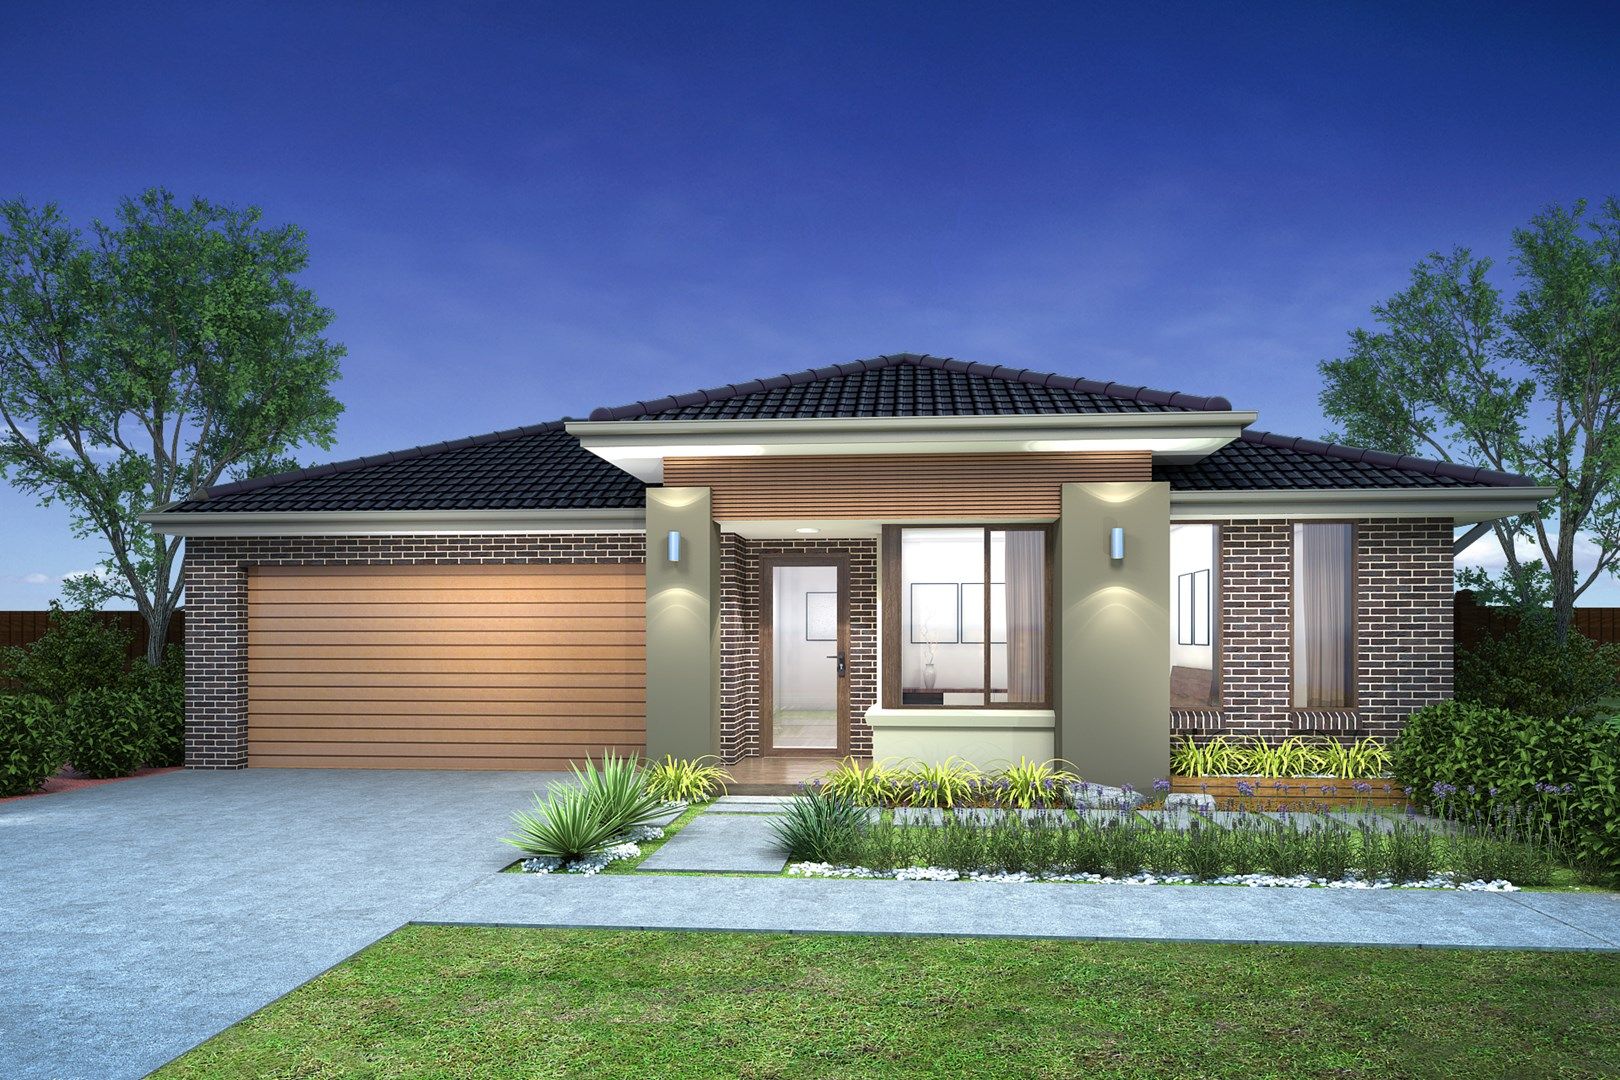 4 bedrooms New House & Land in Lot 315 Paskas Drive Heathfield FRASER RISE VIC, 3336